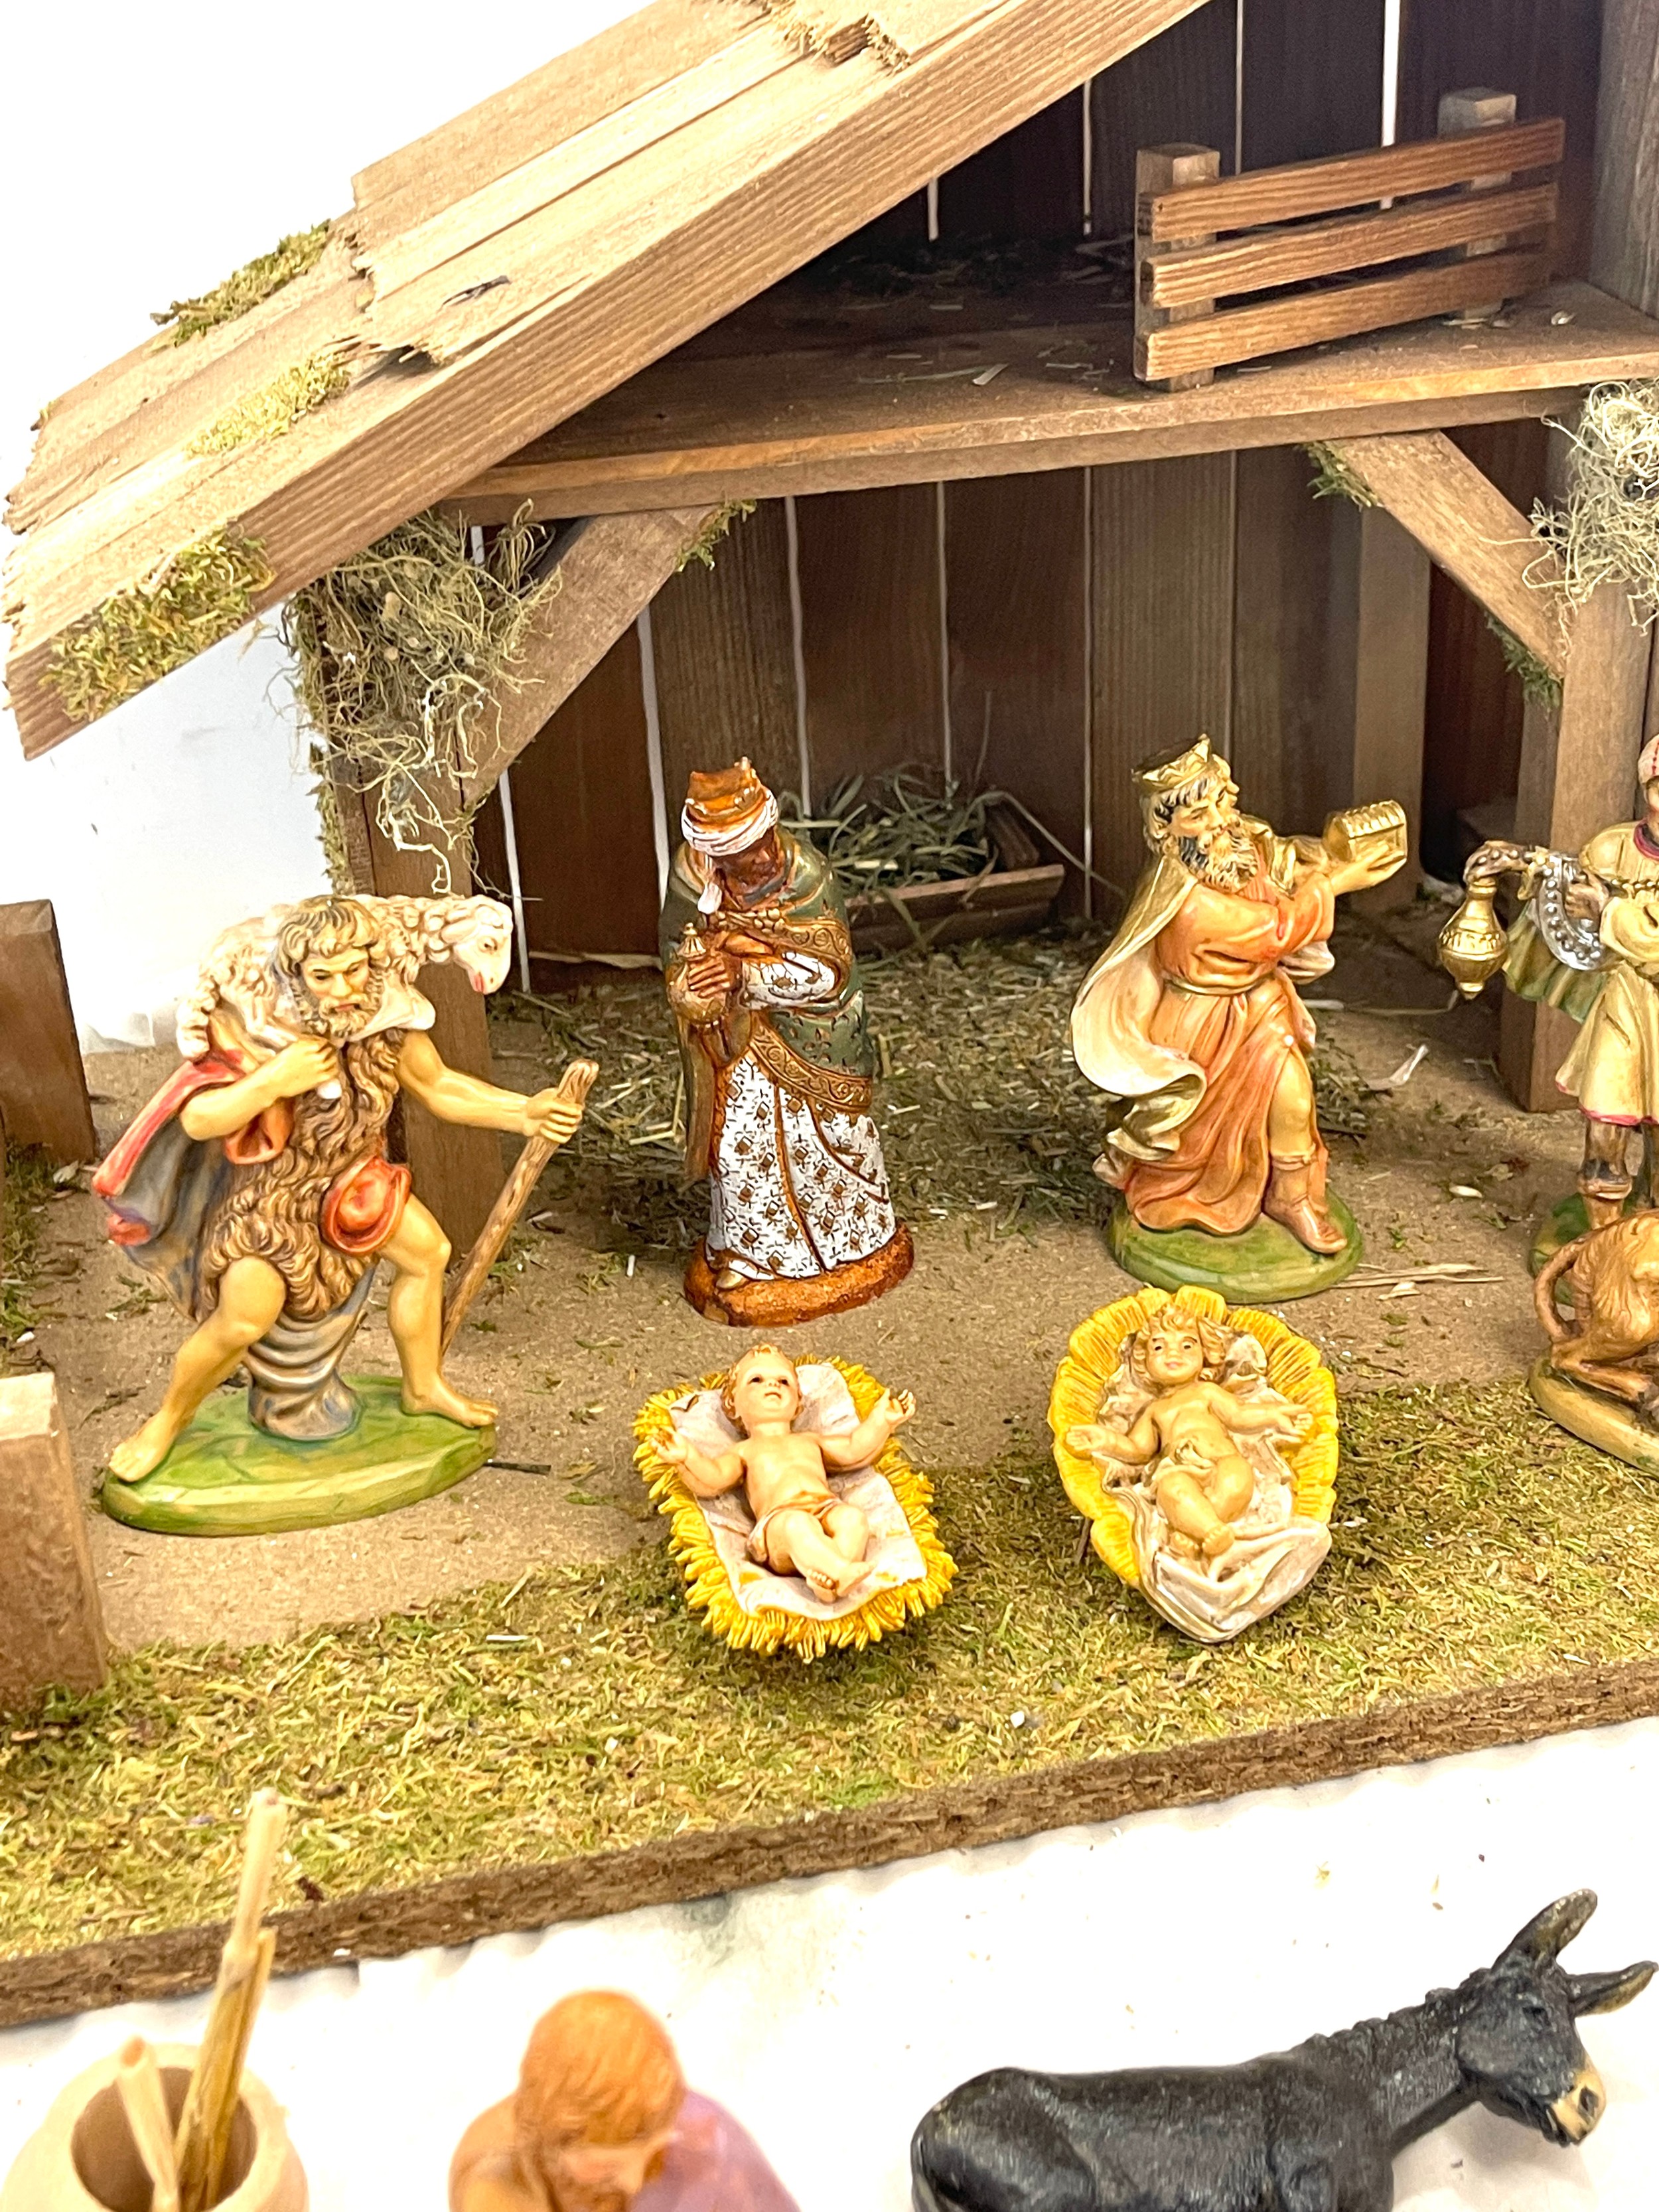 Handmade stable / manger with biblical figures, nativity scene figures by maker Landi Italy , - Image 5 of 6